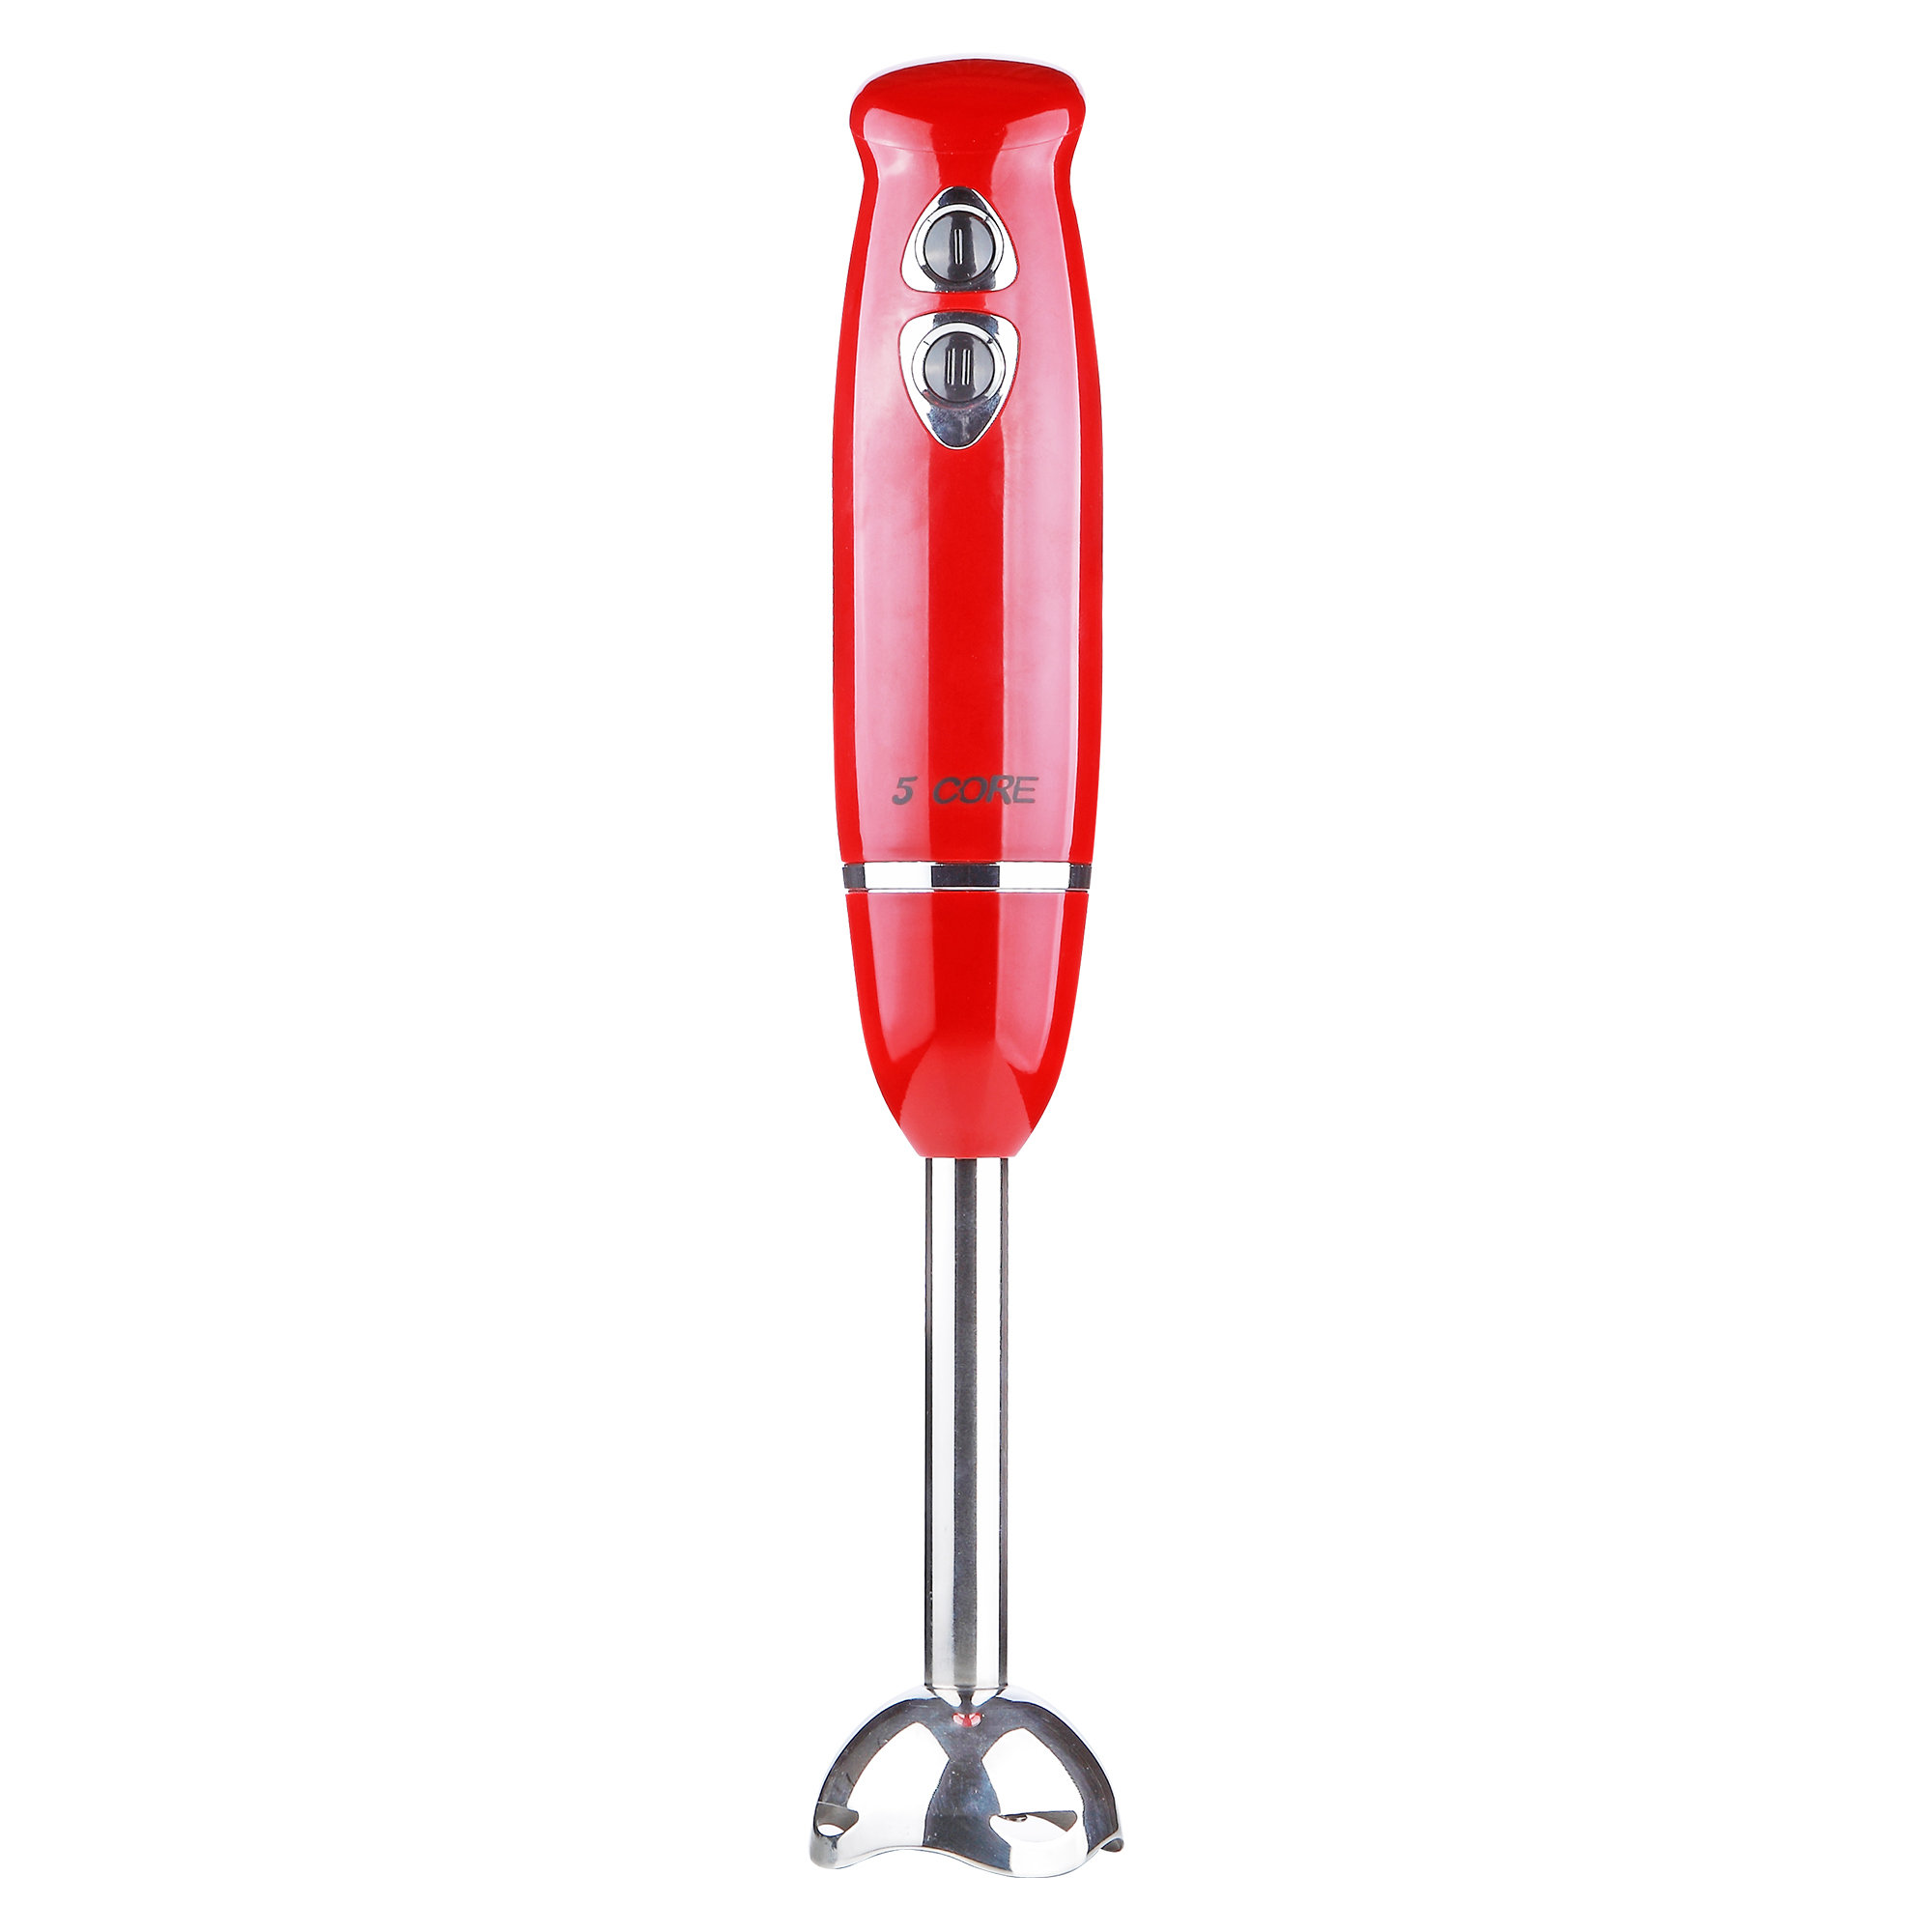 Cordless Hand Blender electric,Immersion Multi-Functional ,4-In-1